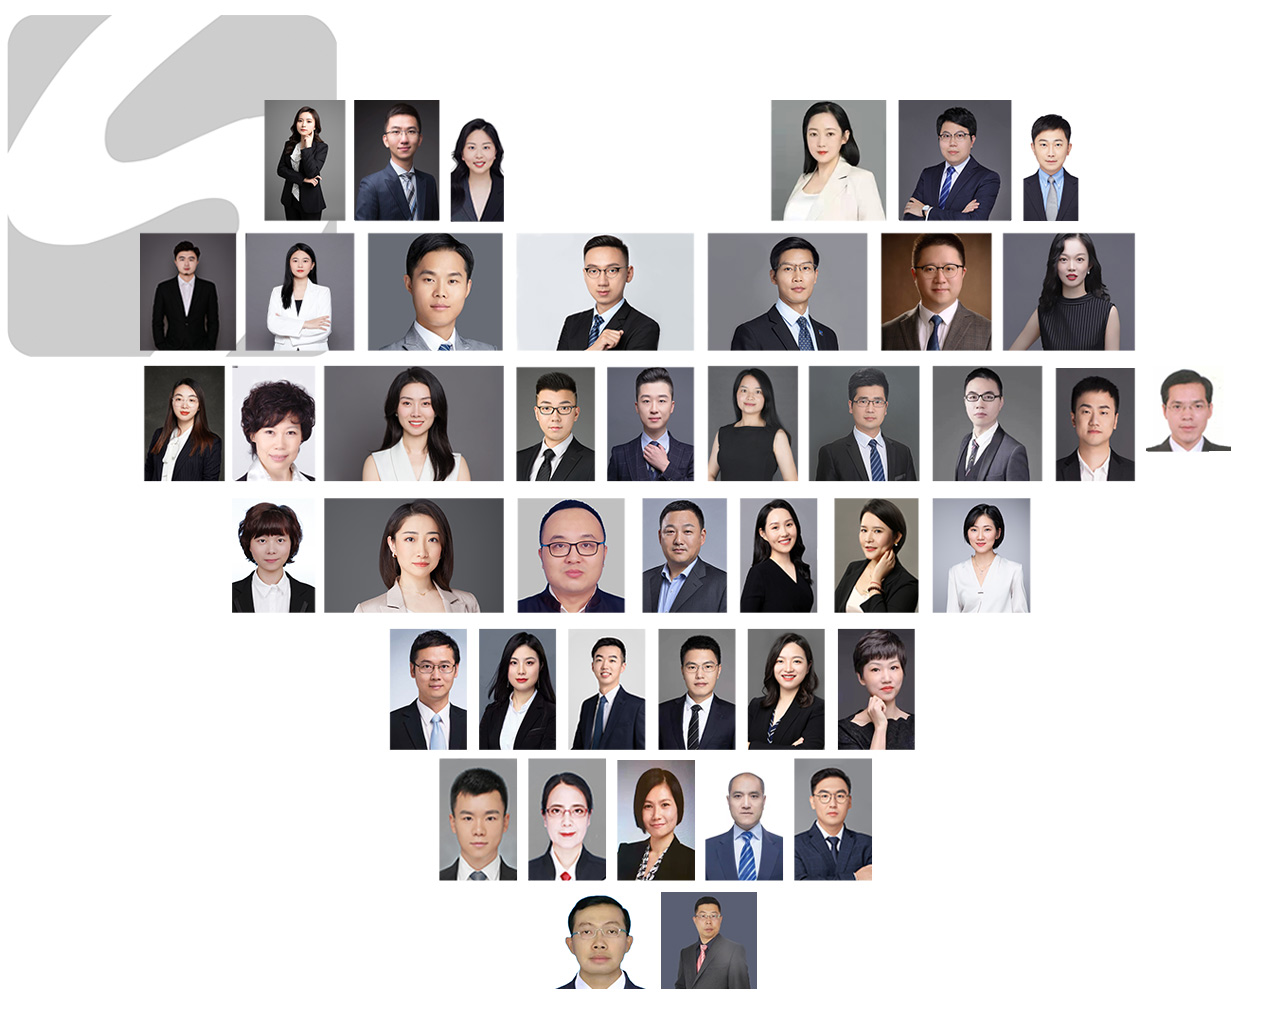 Sunhold Shanghai Office welcomed 18 lawyers to join in | Sunhold News